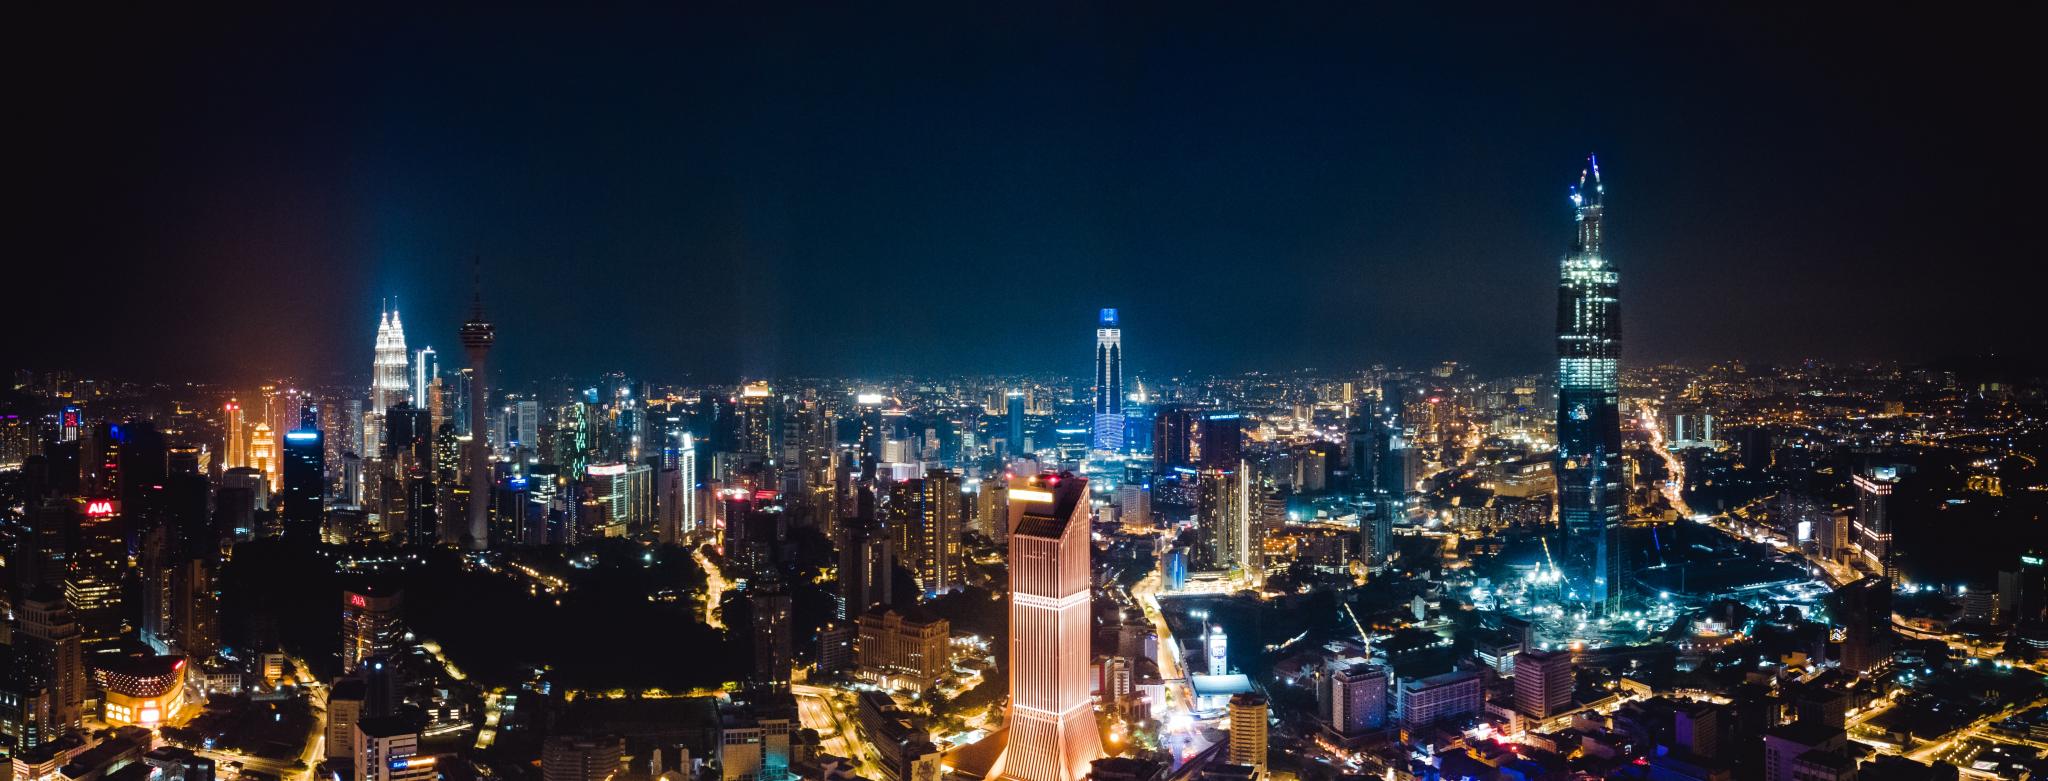 City Lights during the night. Picture by Yonh Chuan. Source: Unsplash